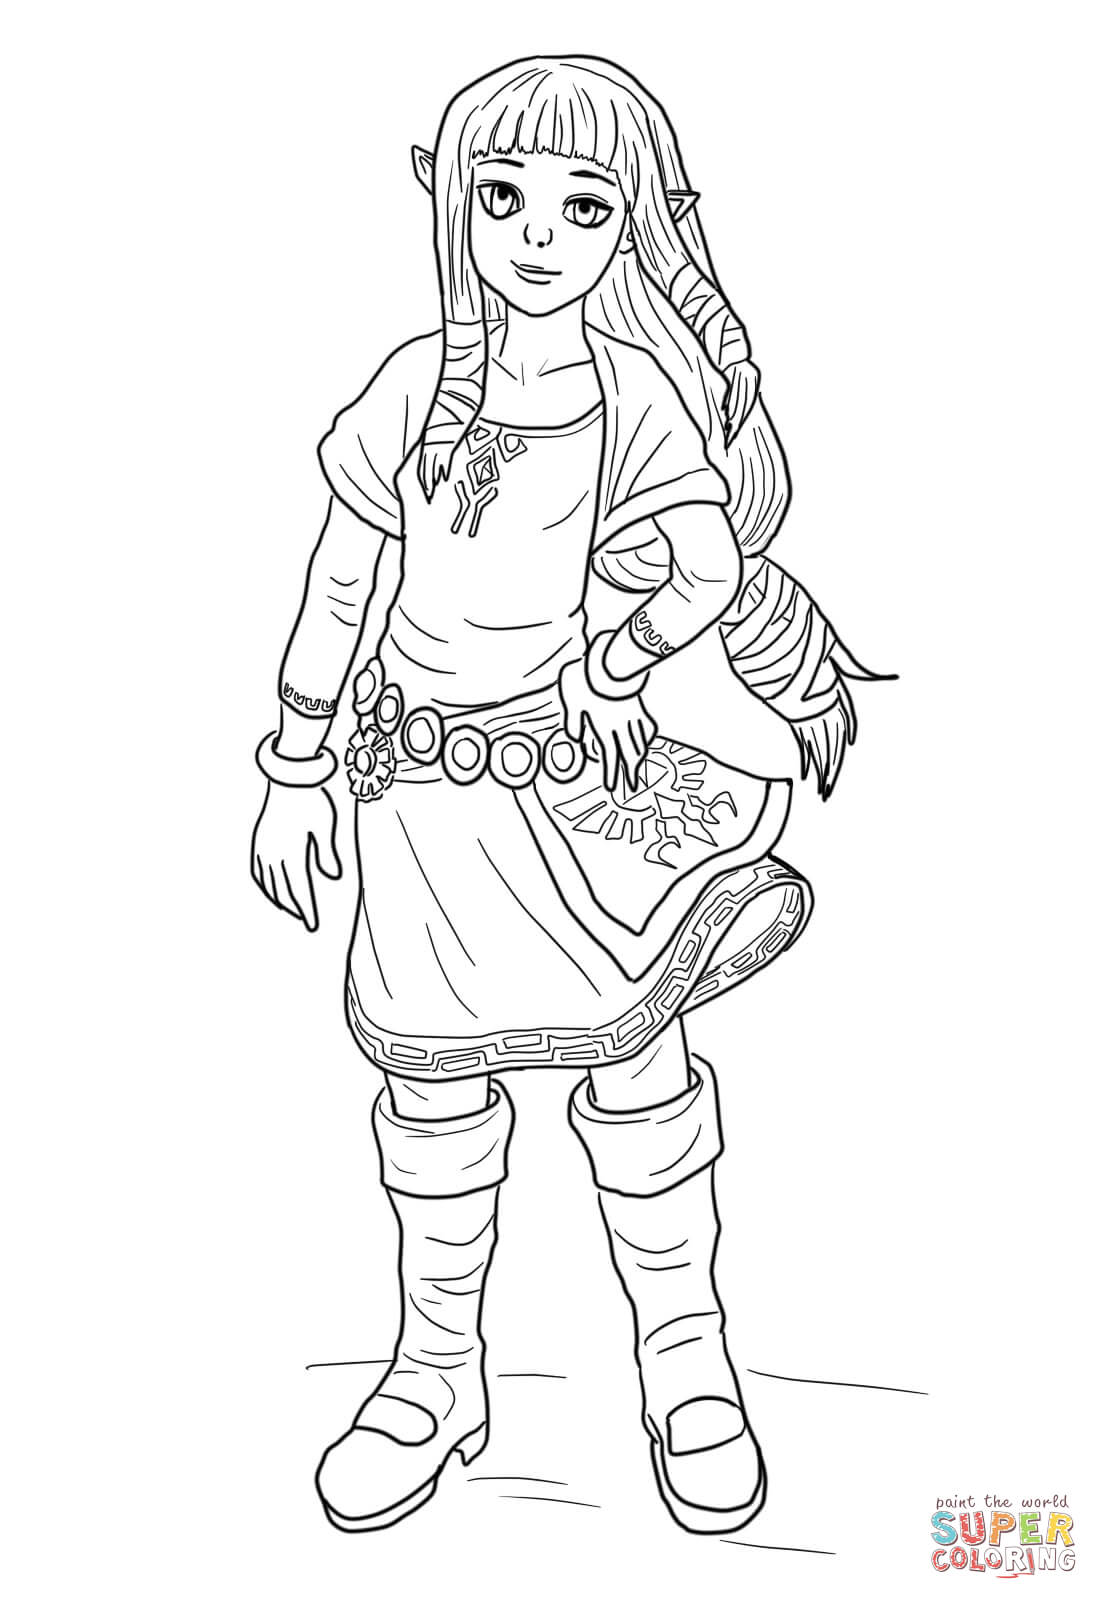 Young zelda coloring page free printable coloring pages